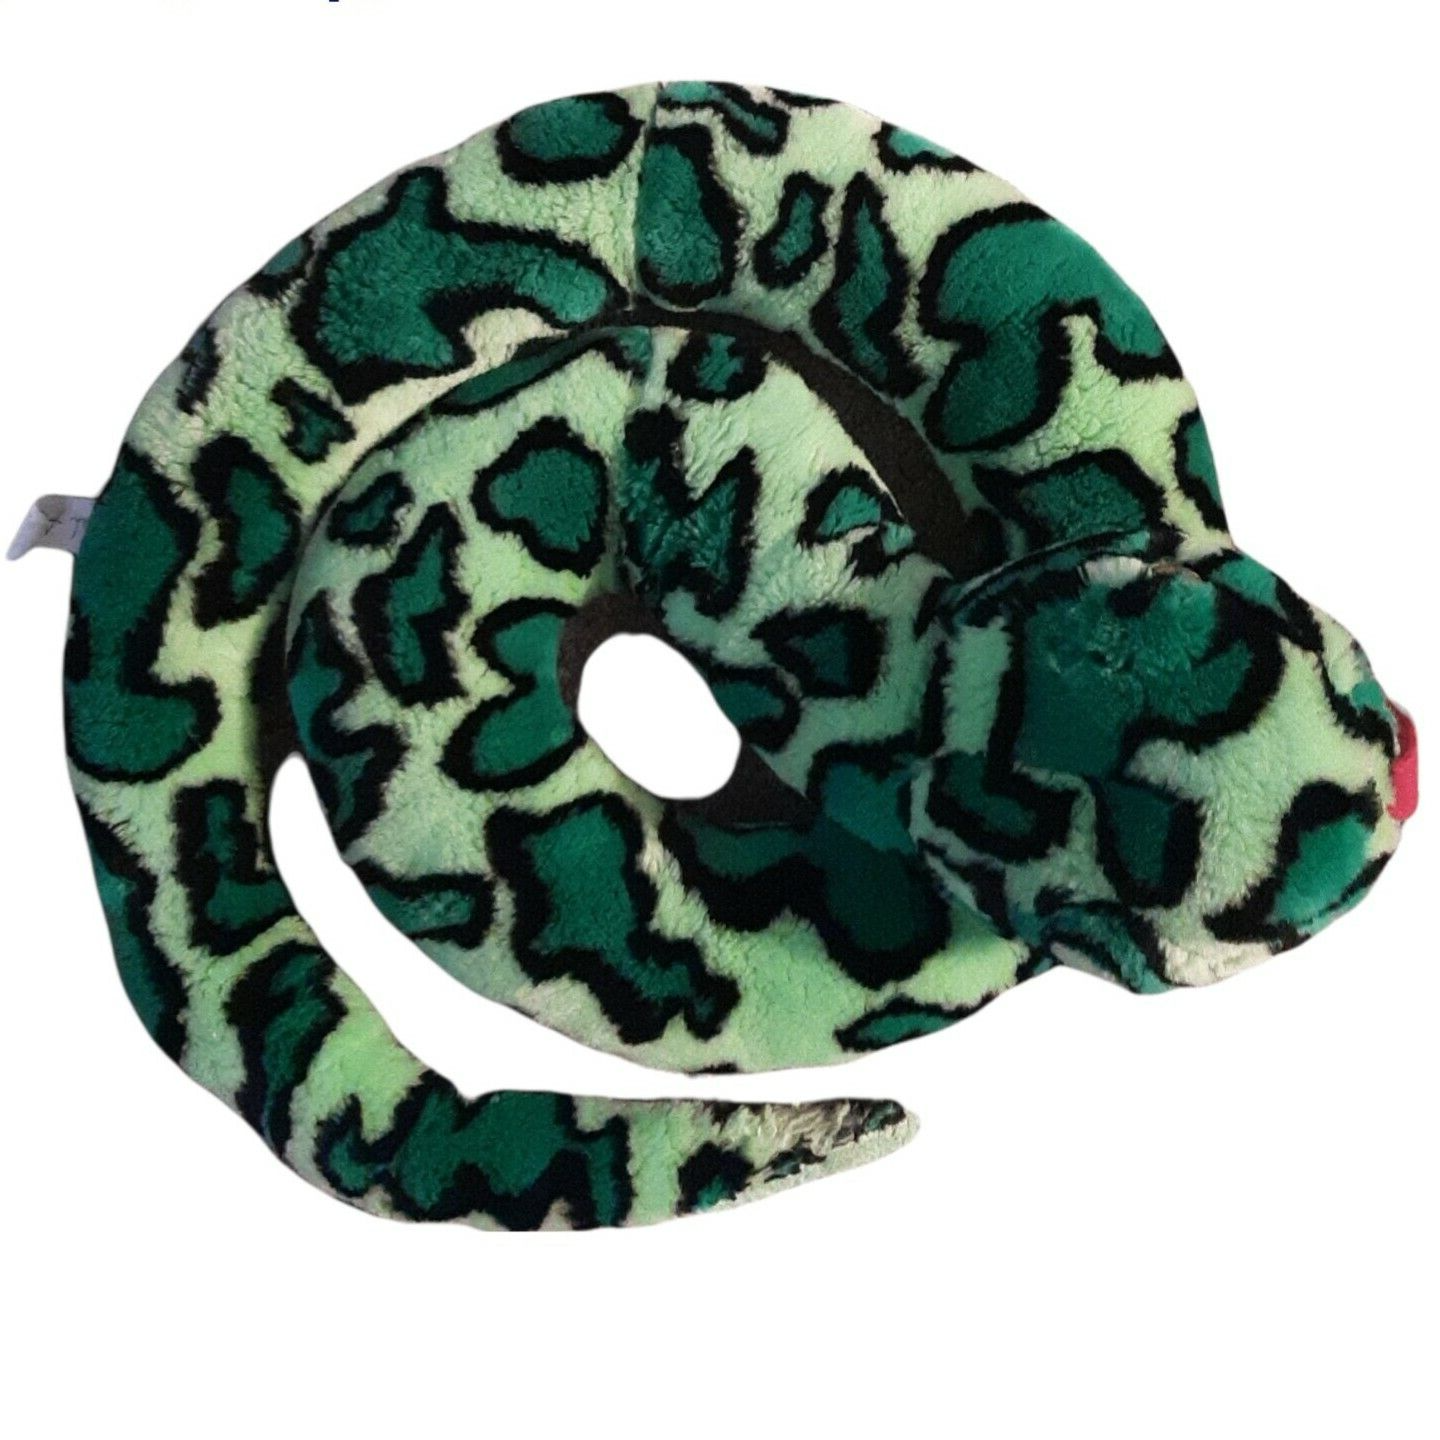 Primary image for Animal Alley Green Snake Plush Stuffed Animal Toy